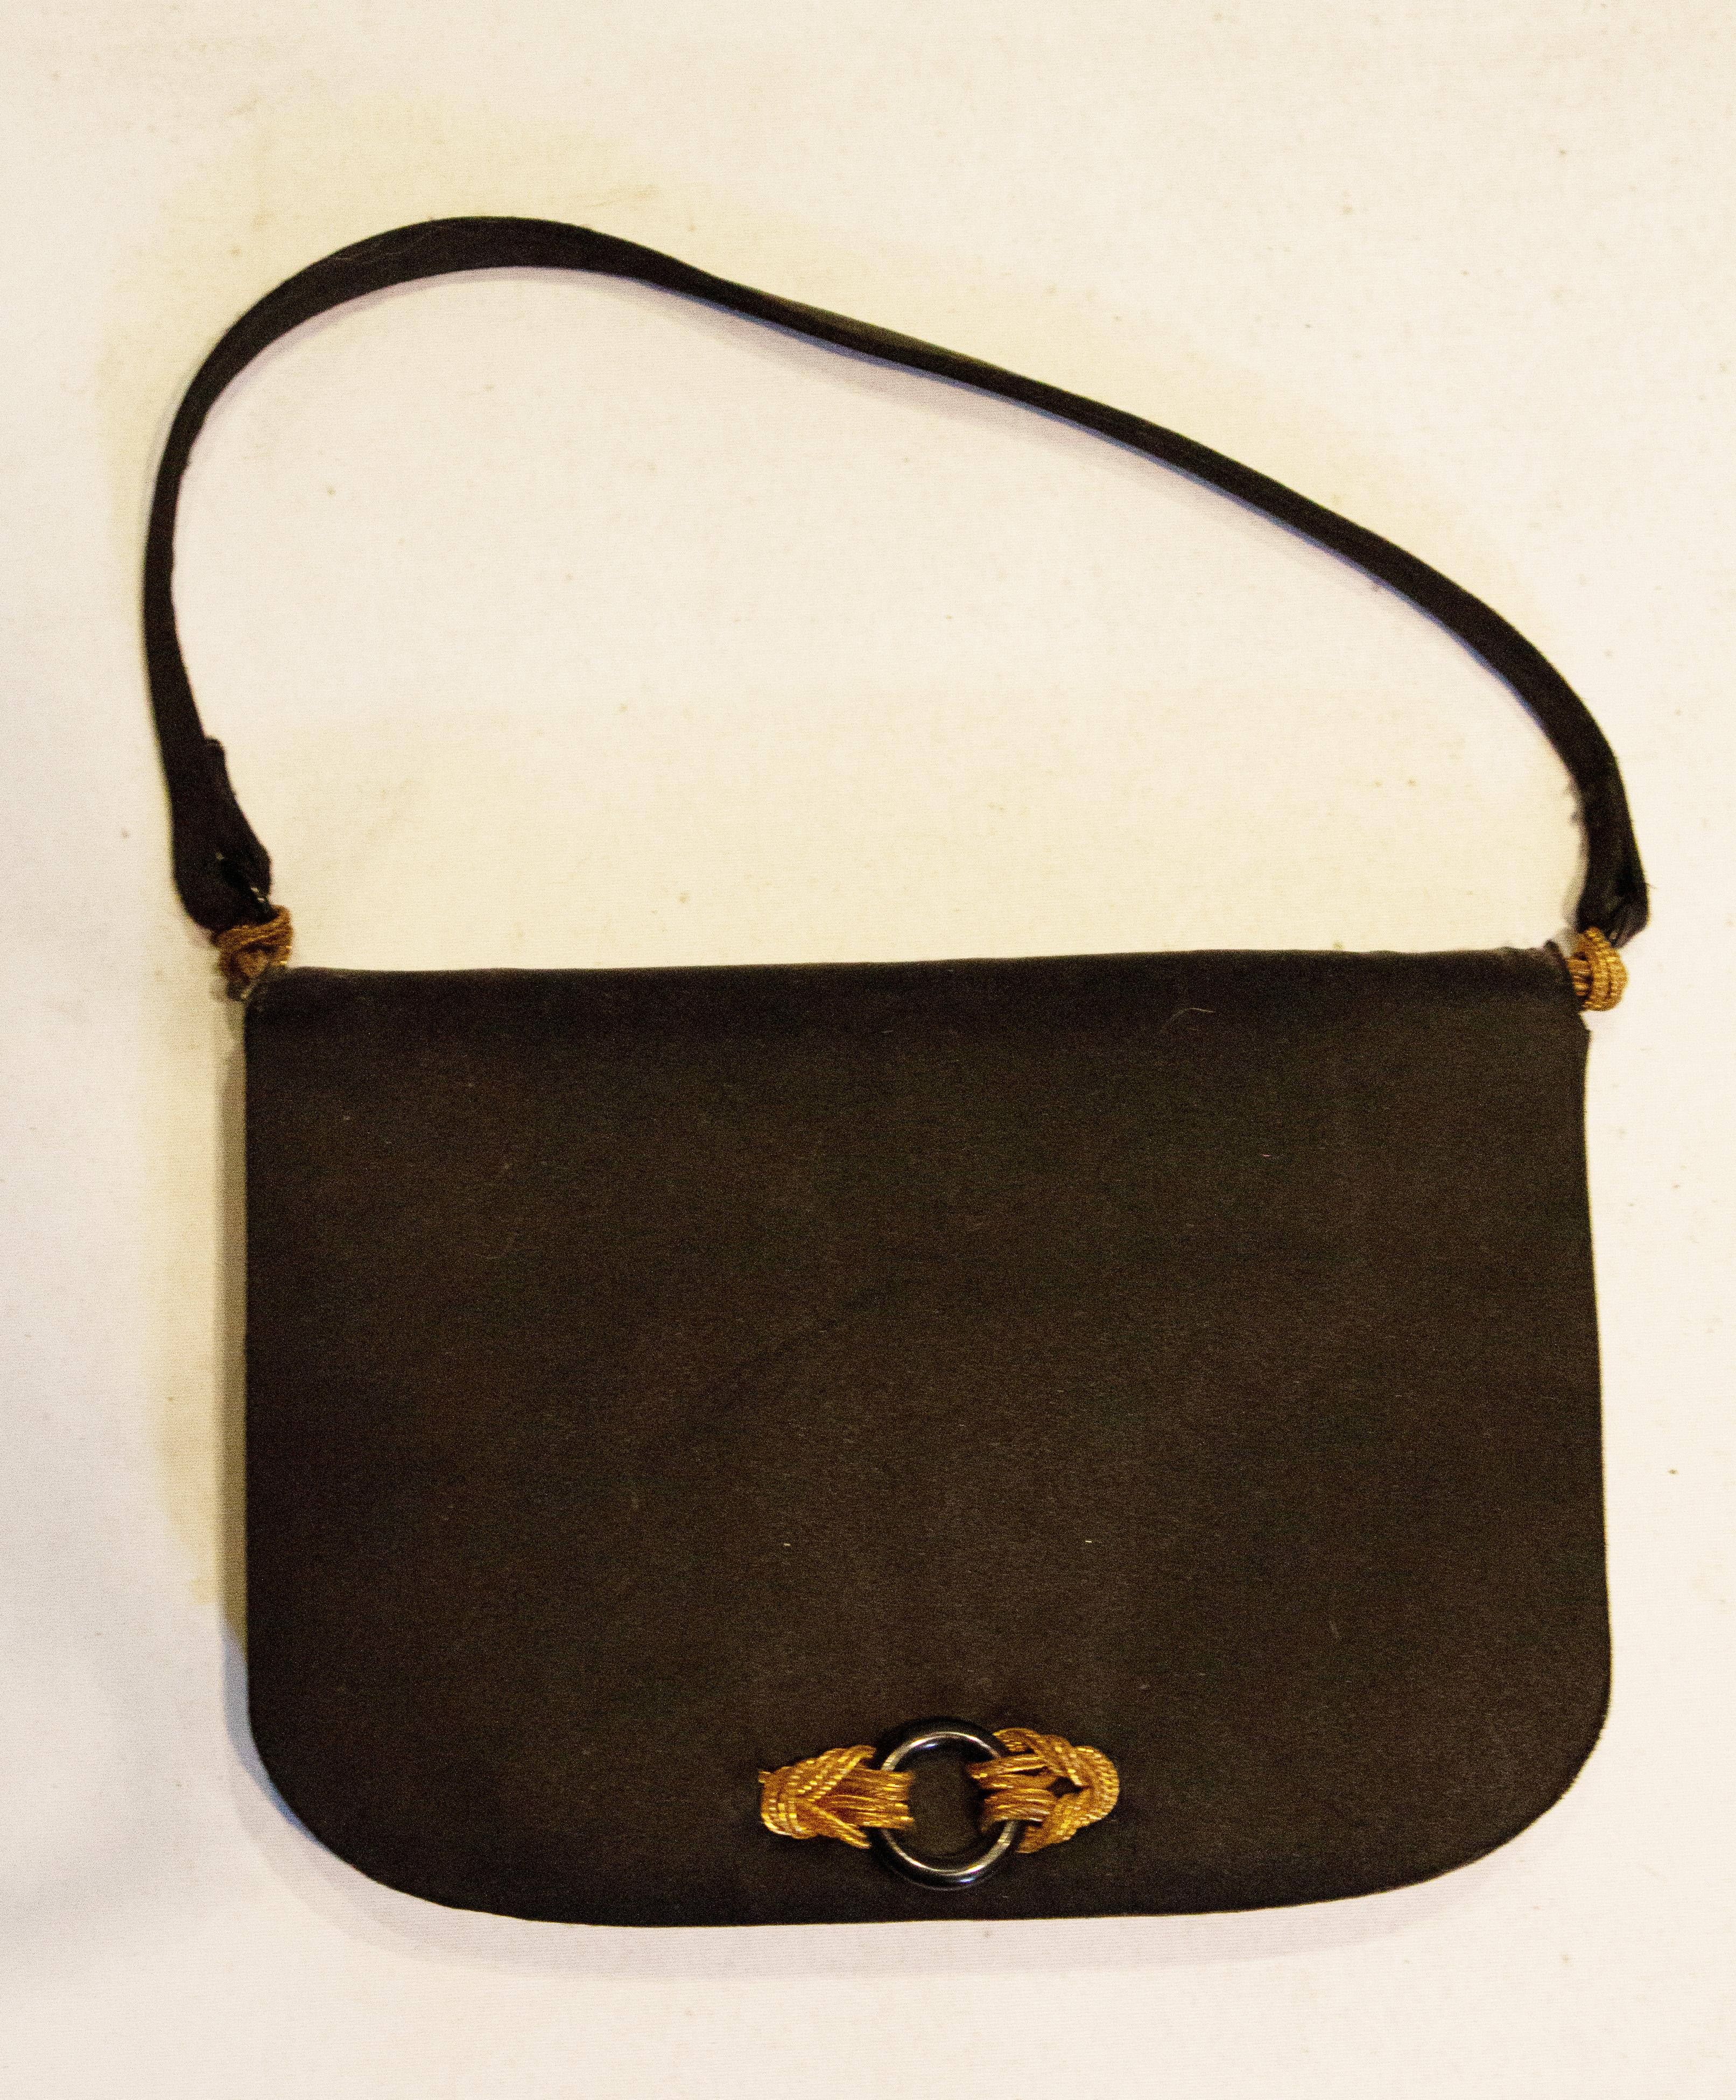 Vintage Black Satin Evening Bag by Rene Mancini In Good Condition For Sale In London, GB